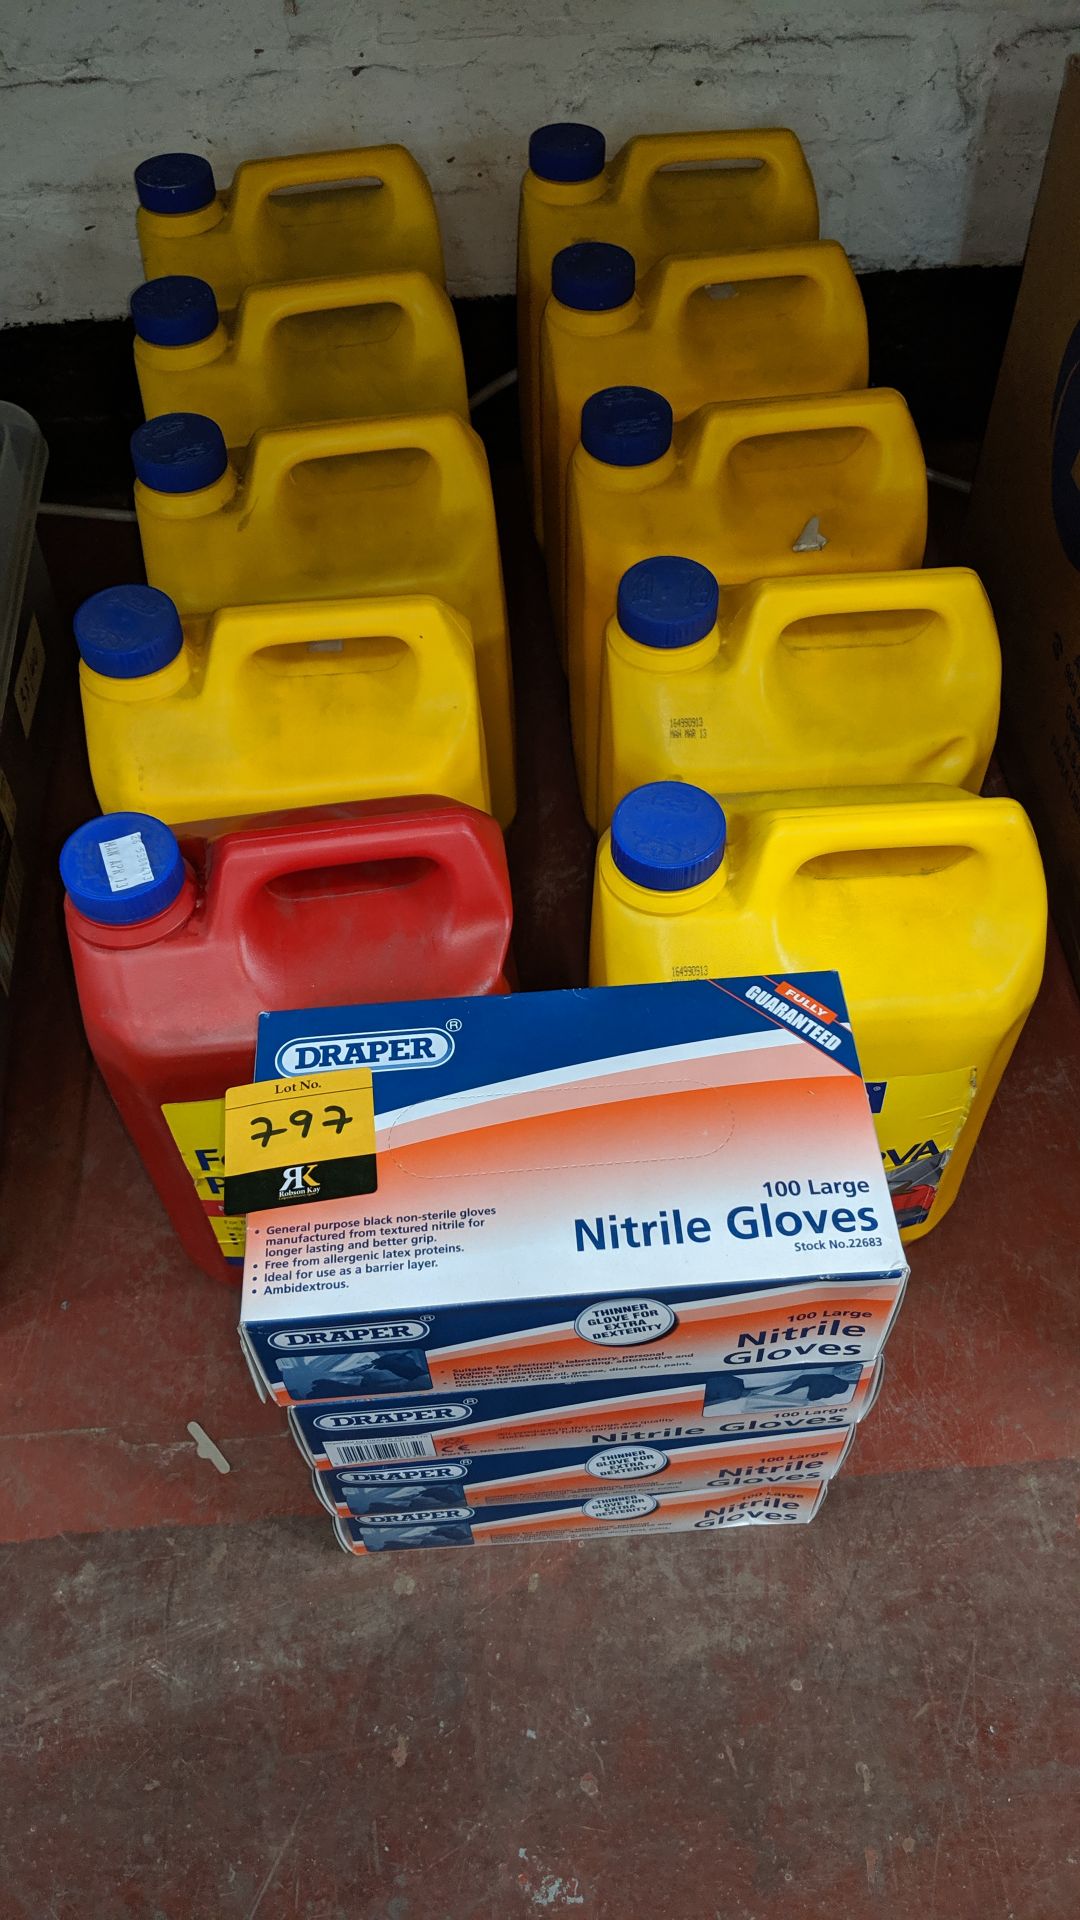 10 tubs of Fabond SPR and Febmix Plus, plus 4 boxes of Draper nitrile gloves IMPORTANT: Please